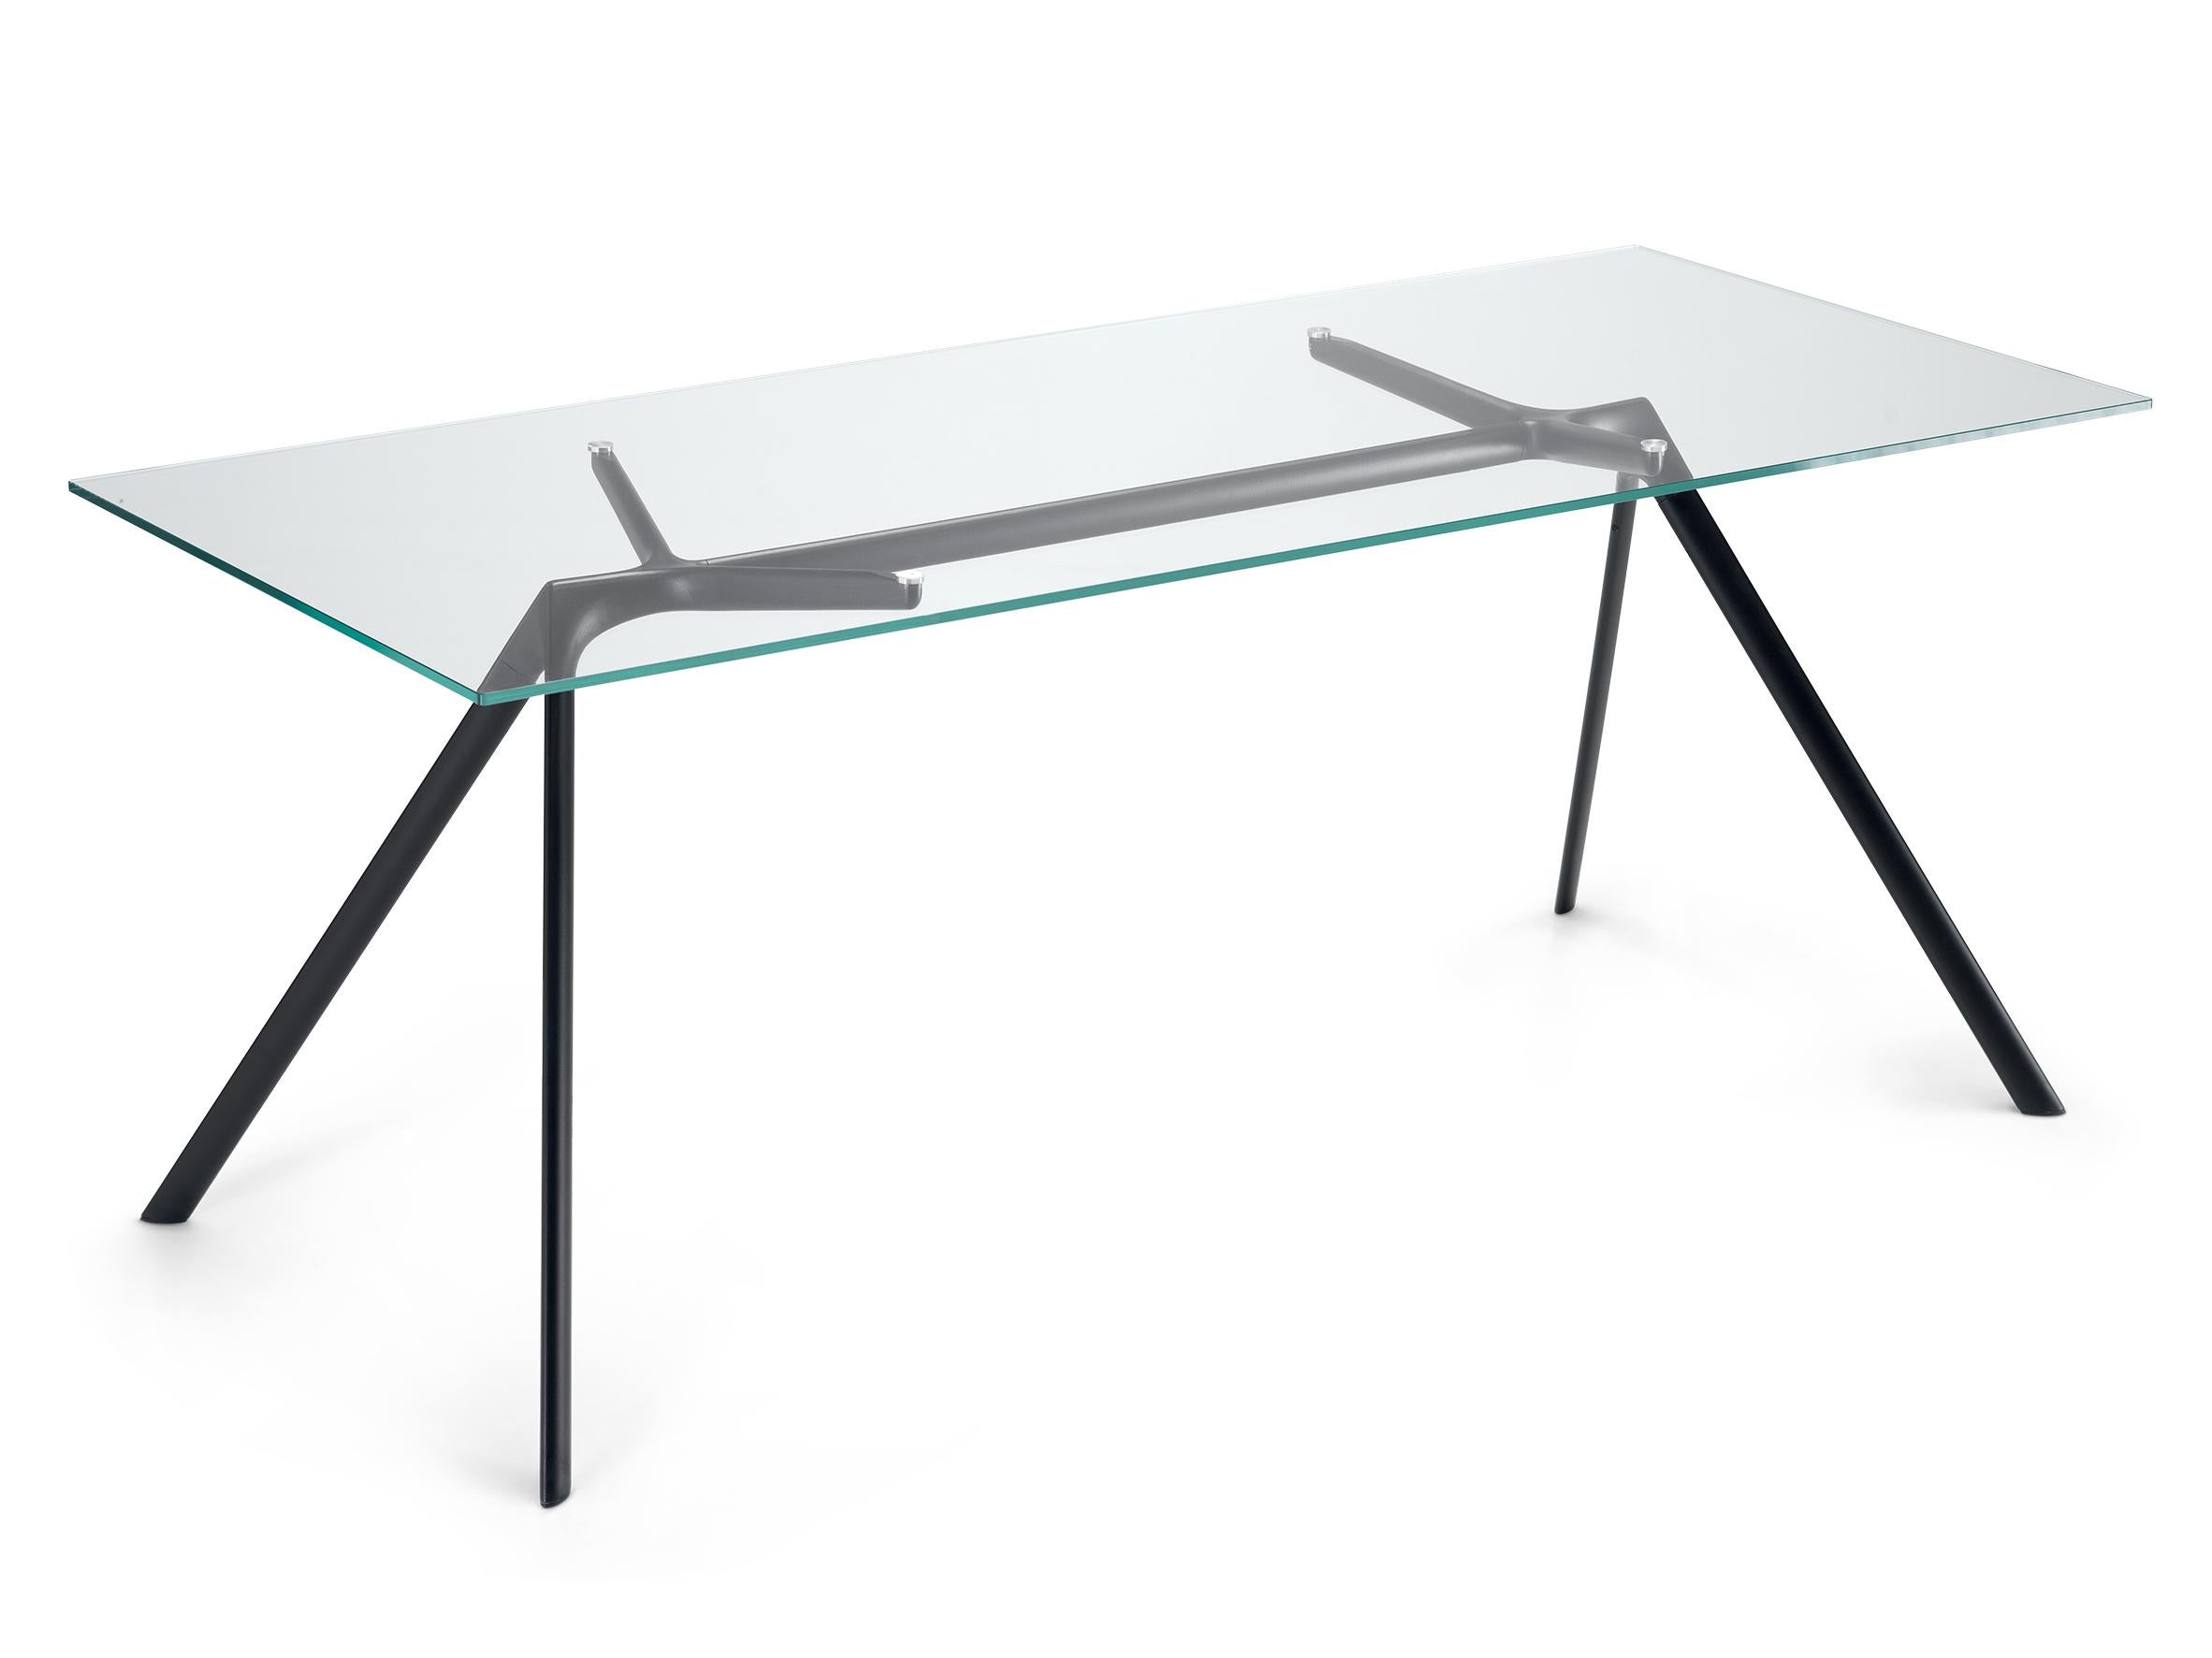 Alias Large Dry 45A Table in Glass Top with Black Lacquered Aluminium Frame by Alberto Meda

Table with structure made of lacquered aluminium elements. Top in extra light tempered glass, thickness 10 mm. Available with predisposition for cable